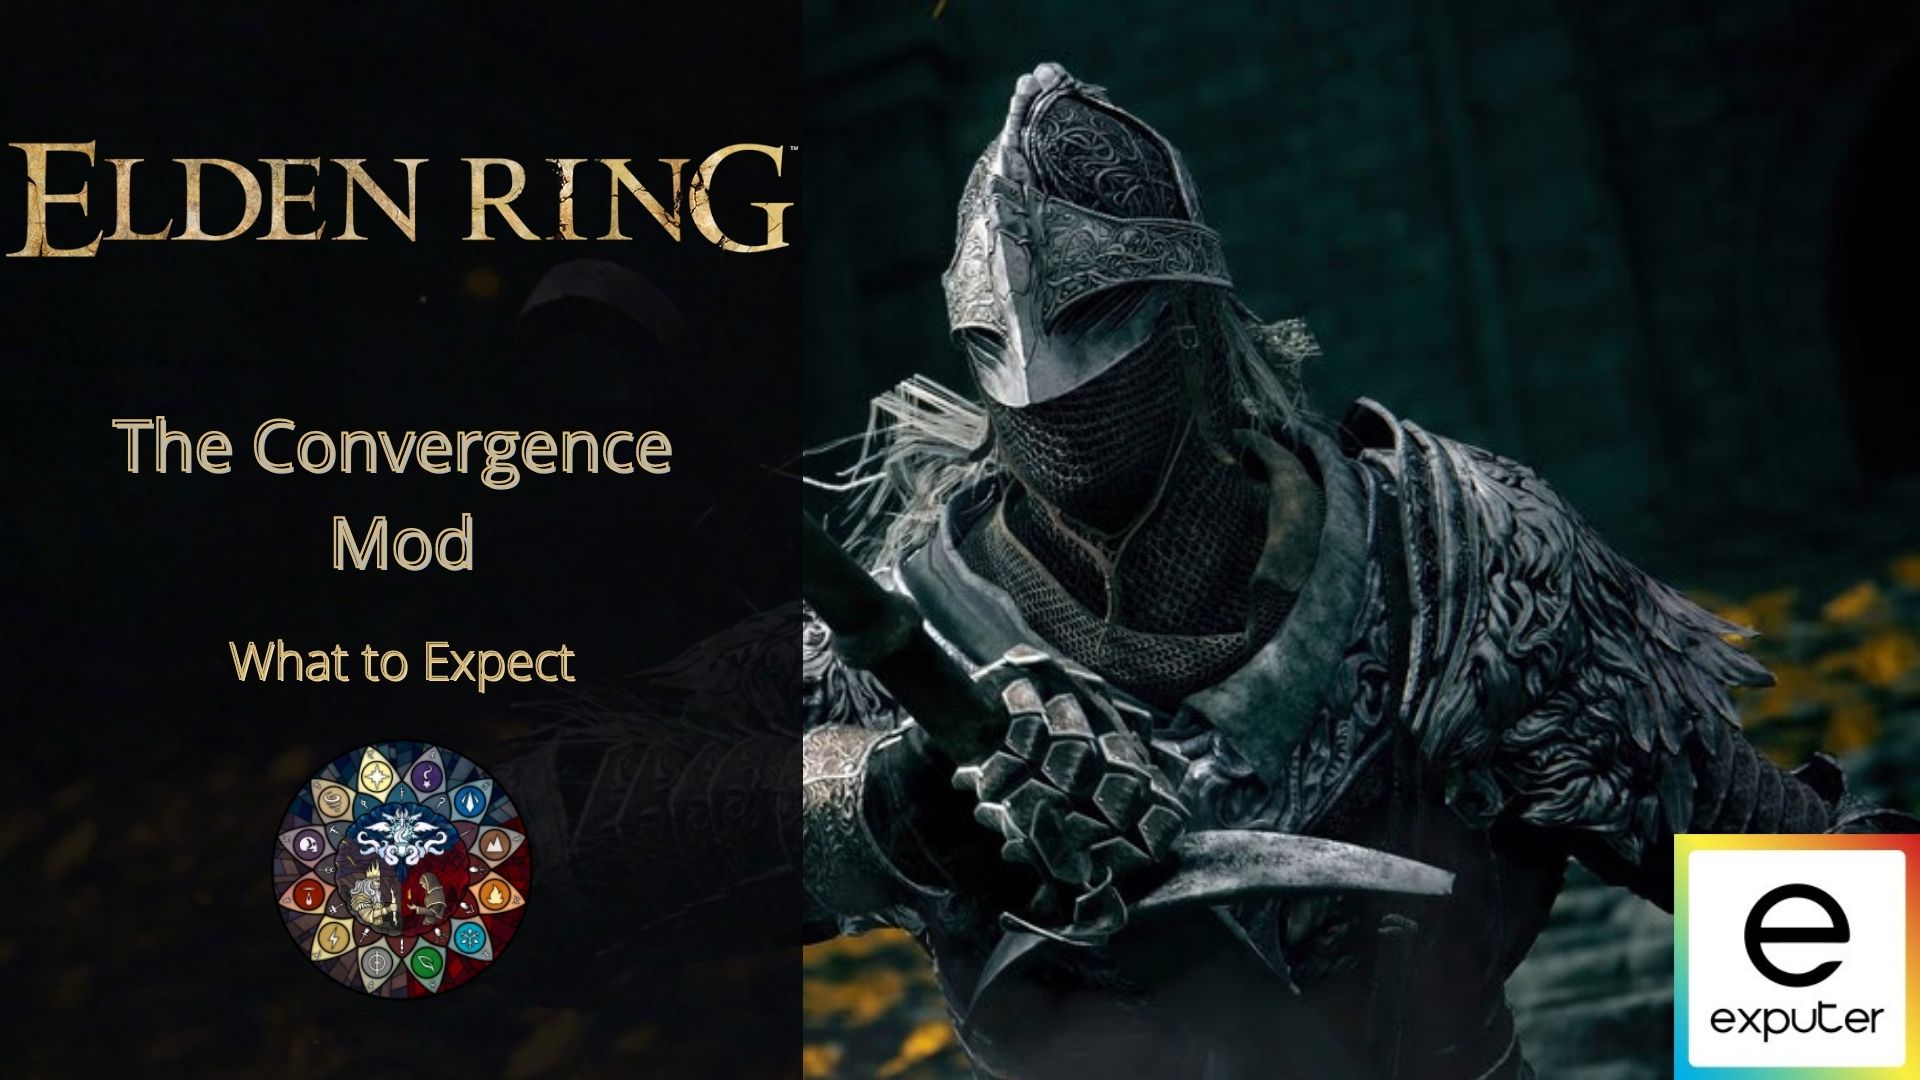 Elden Ring The Convergence Mod: What To Expect